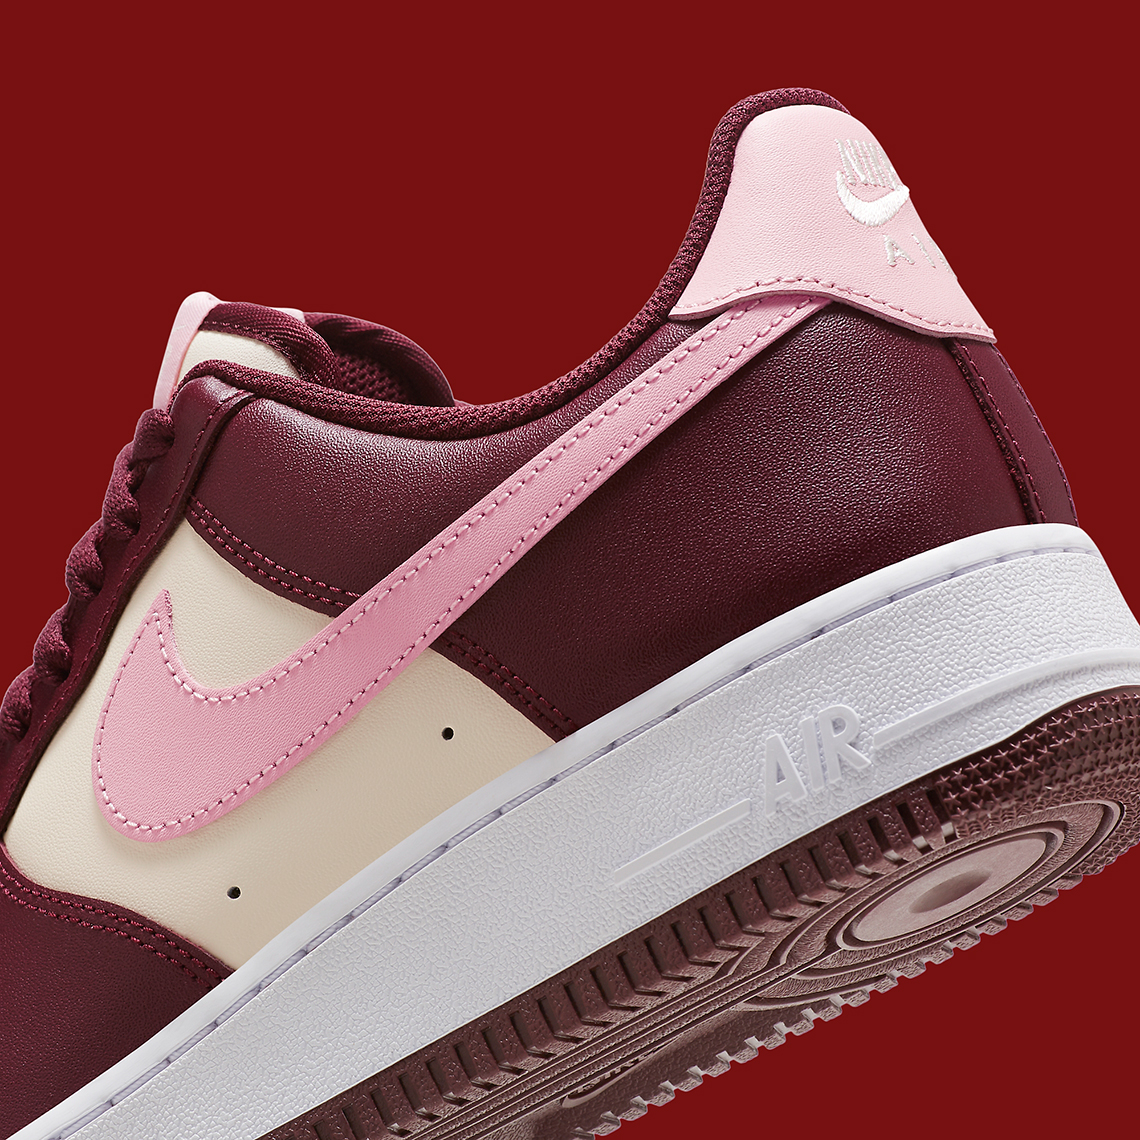 Nike nike air olympic 2015 results today football team Low Valentines Day Sail Night Maroon Medium Soft Pink 5